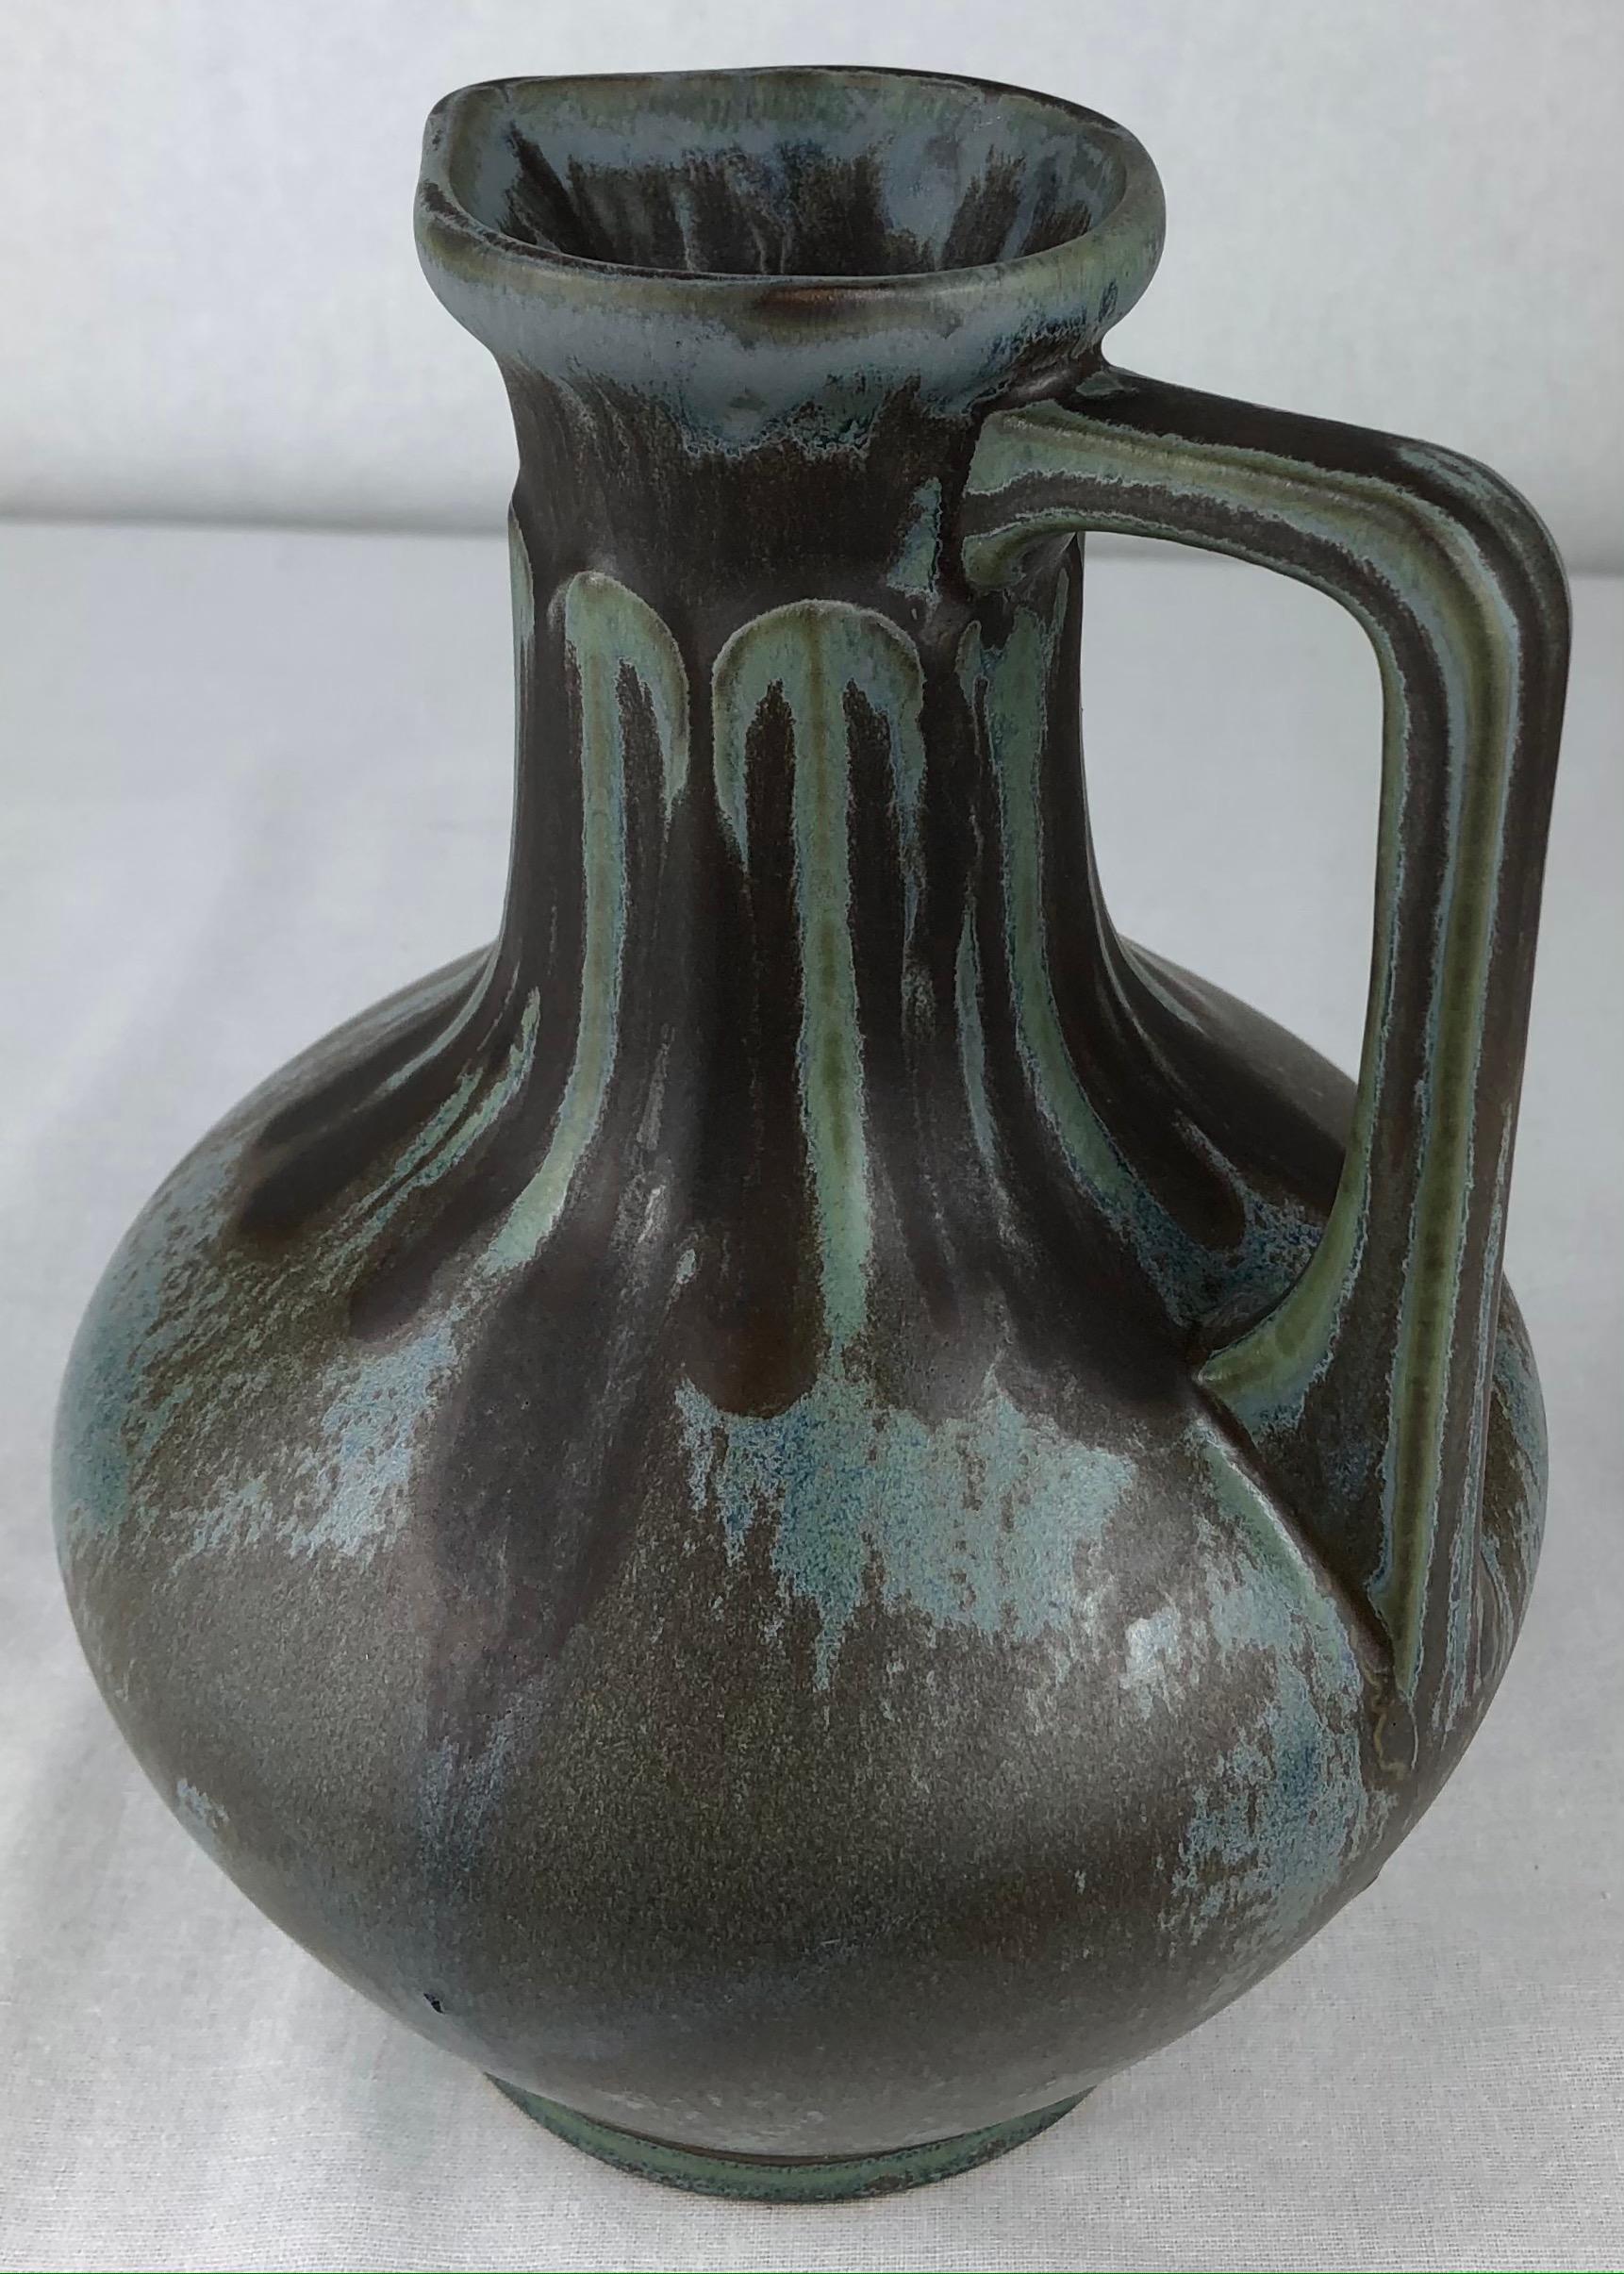 A stunning art nouveau or art deco transition period attributed to French art pottery from La Société Denert et Balichon, known as Denbac Pottery of Vierzon, dating circa 1930. 

Denbac's grès flammés (flamed sandstone) glazes are unique to every